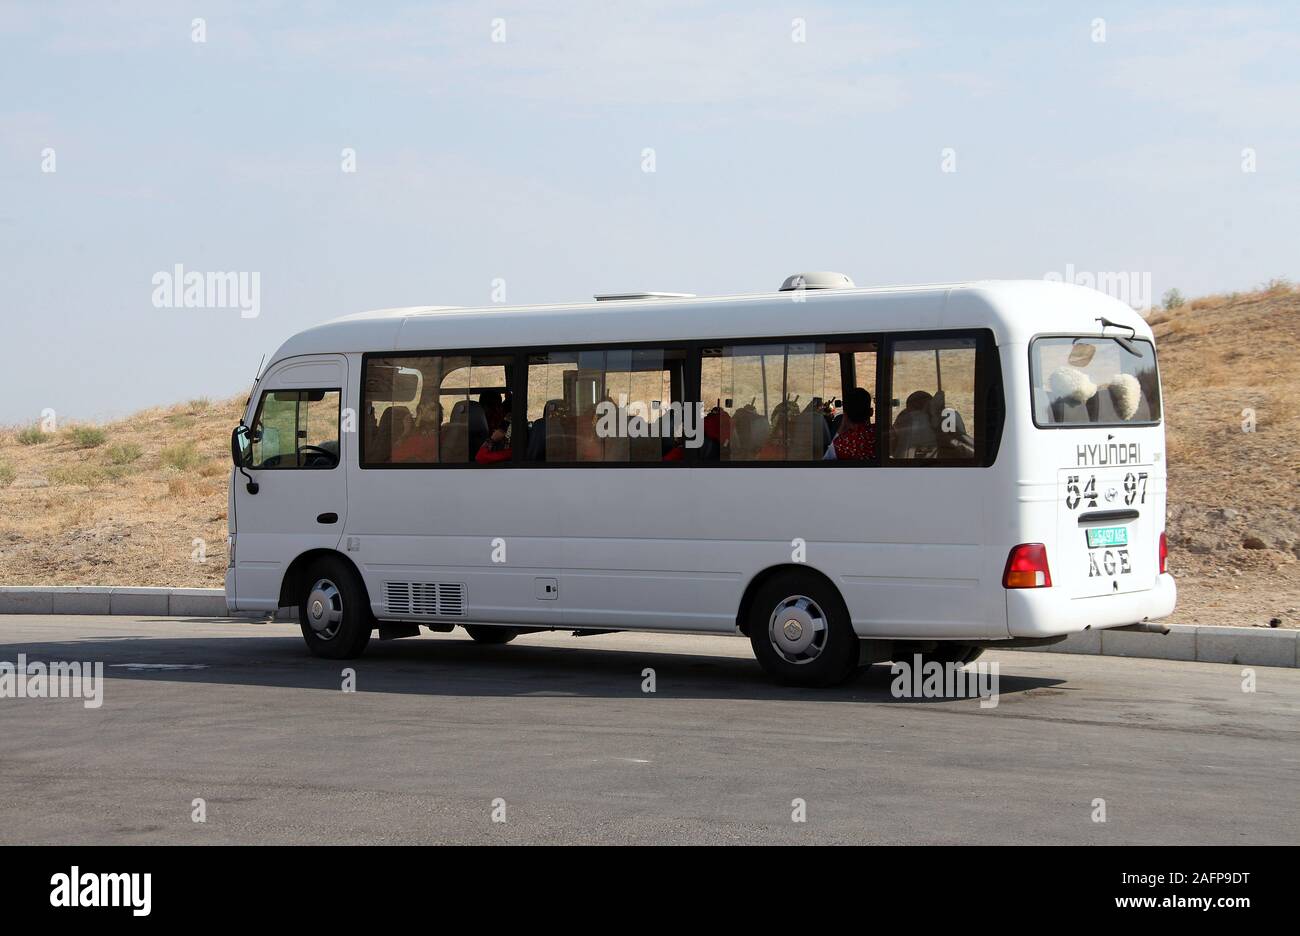 Bus full of people wearing traditional costumes in Turkmenistan Stock Photo